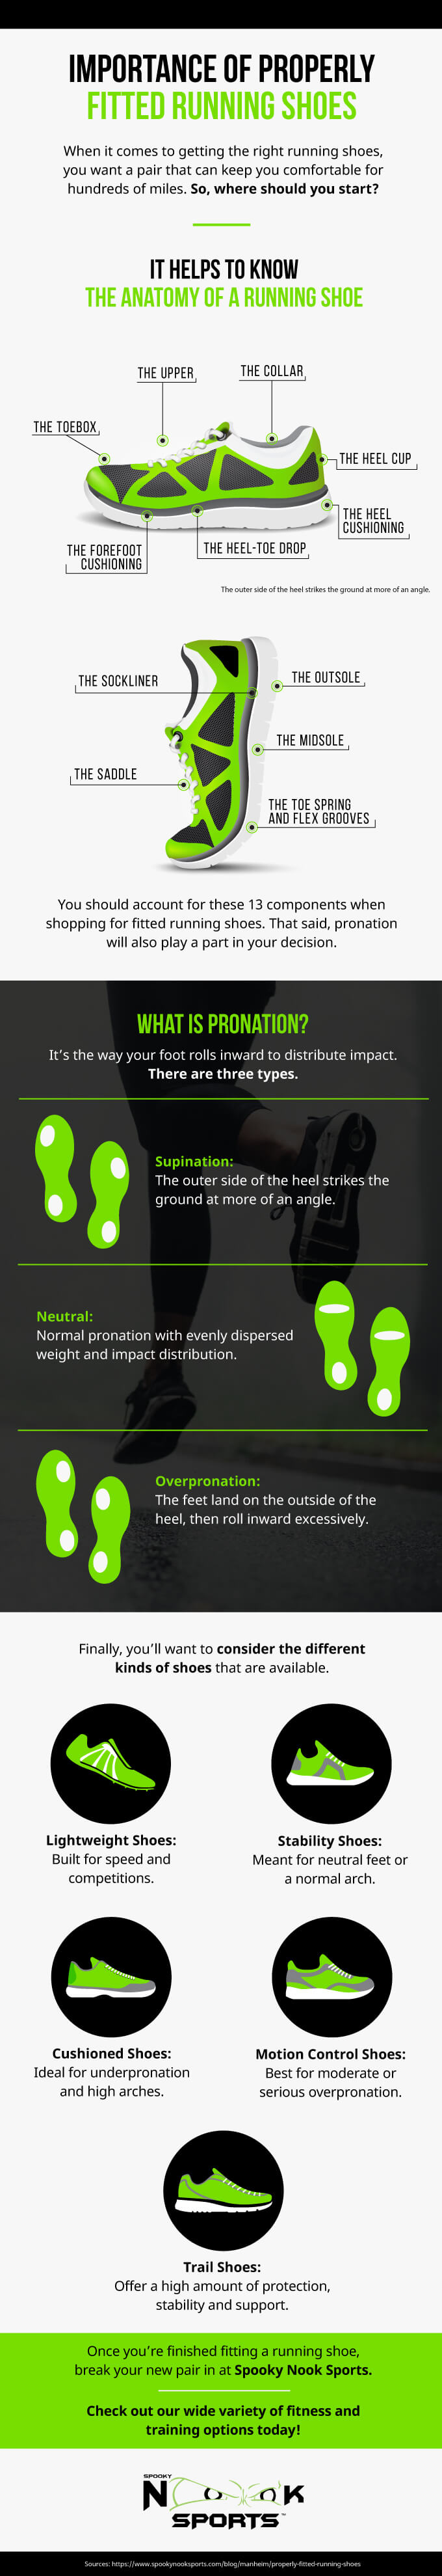 Importance of Proper Fitness Clothing and Footwear